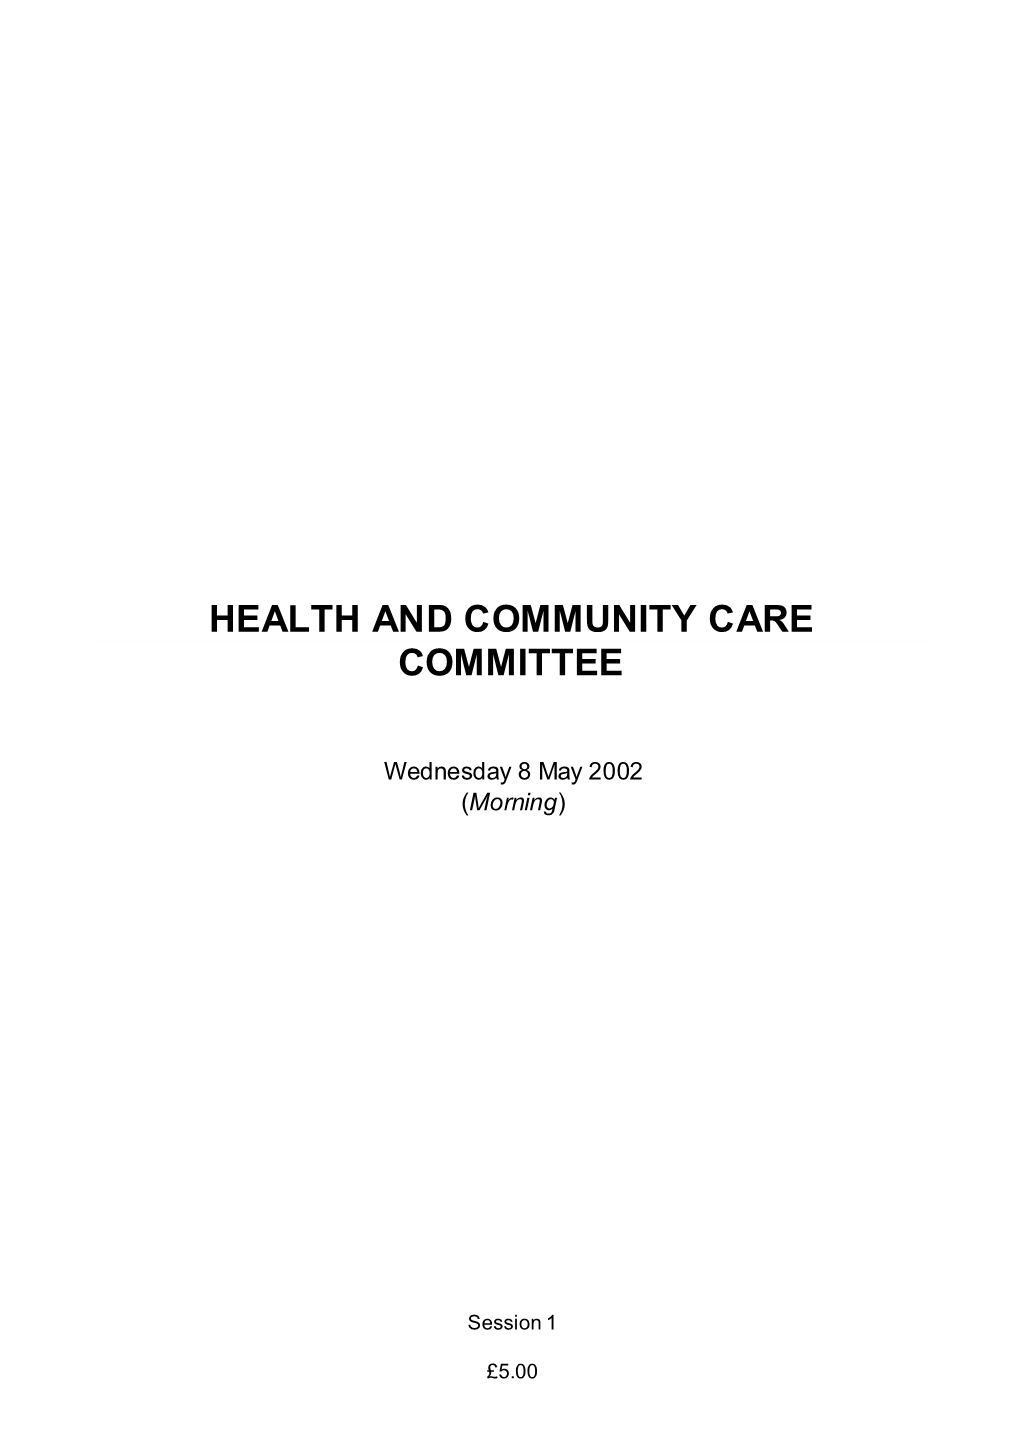 Health and Community Care Committee